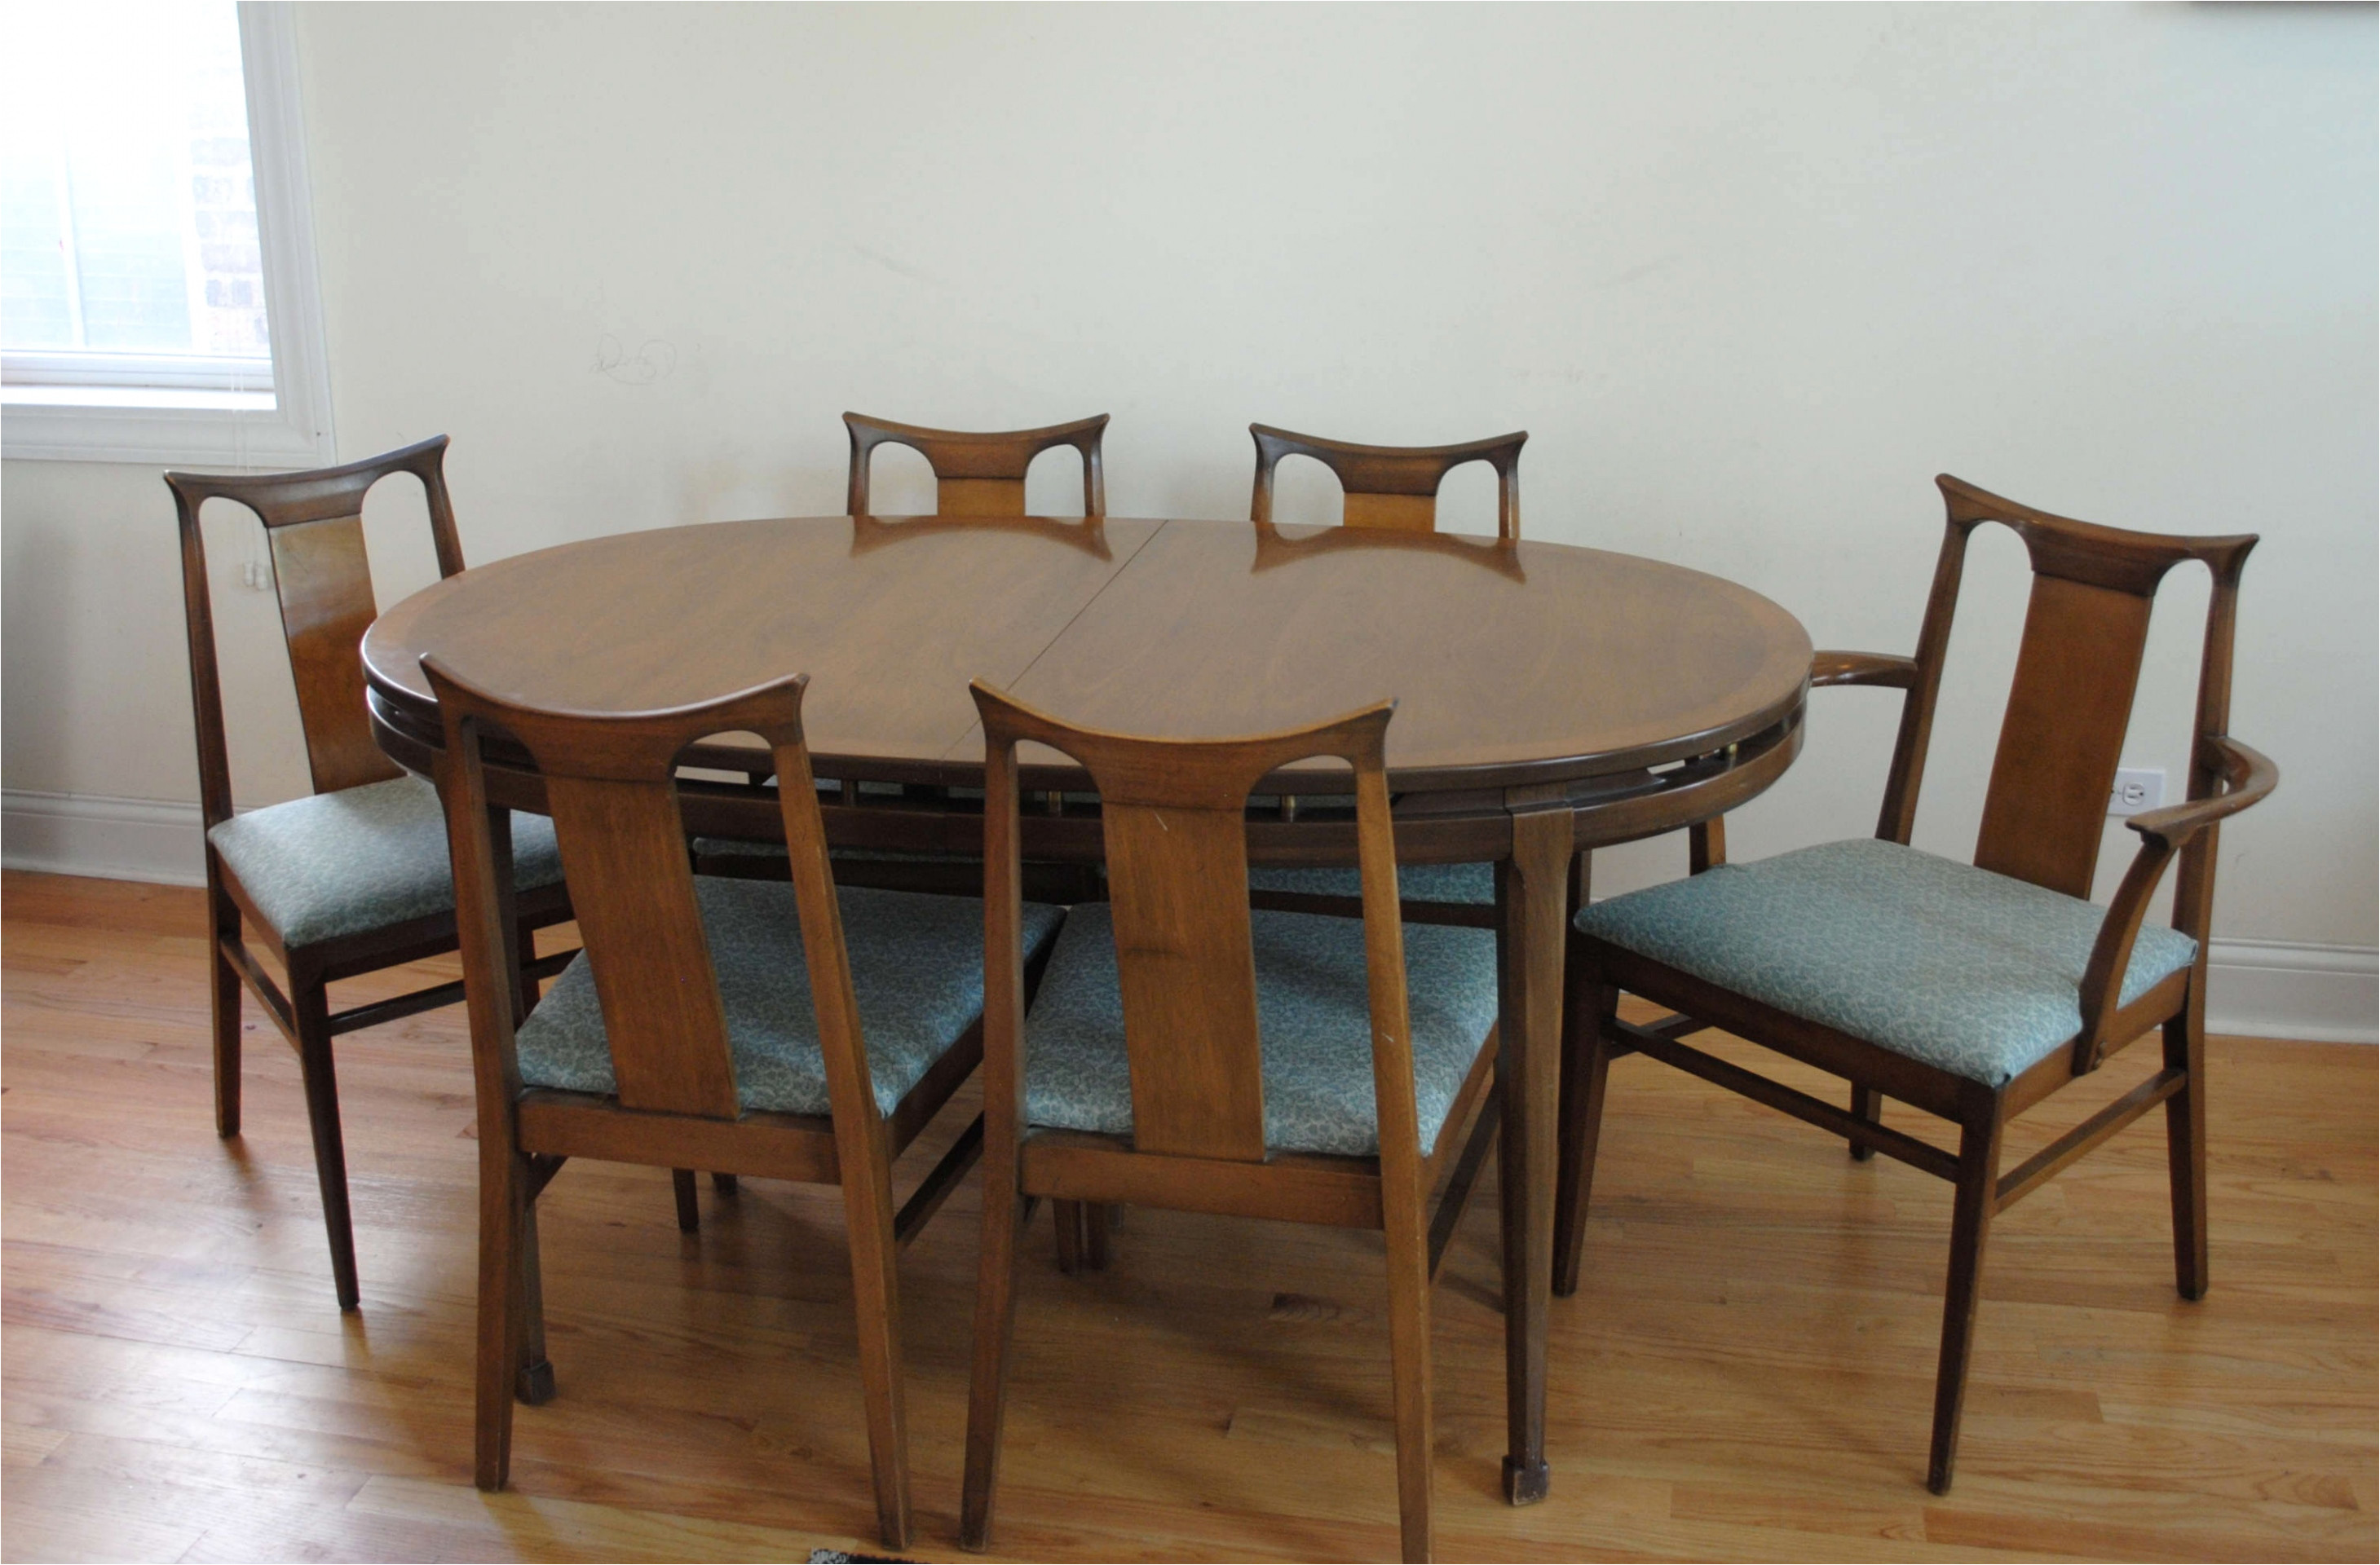 mid century wood chair lovely mid century dining table and chairs best mid century od 49